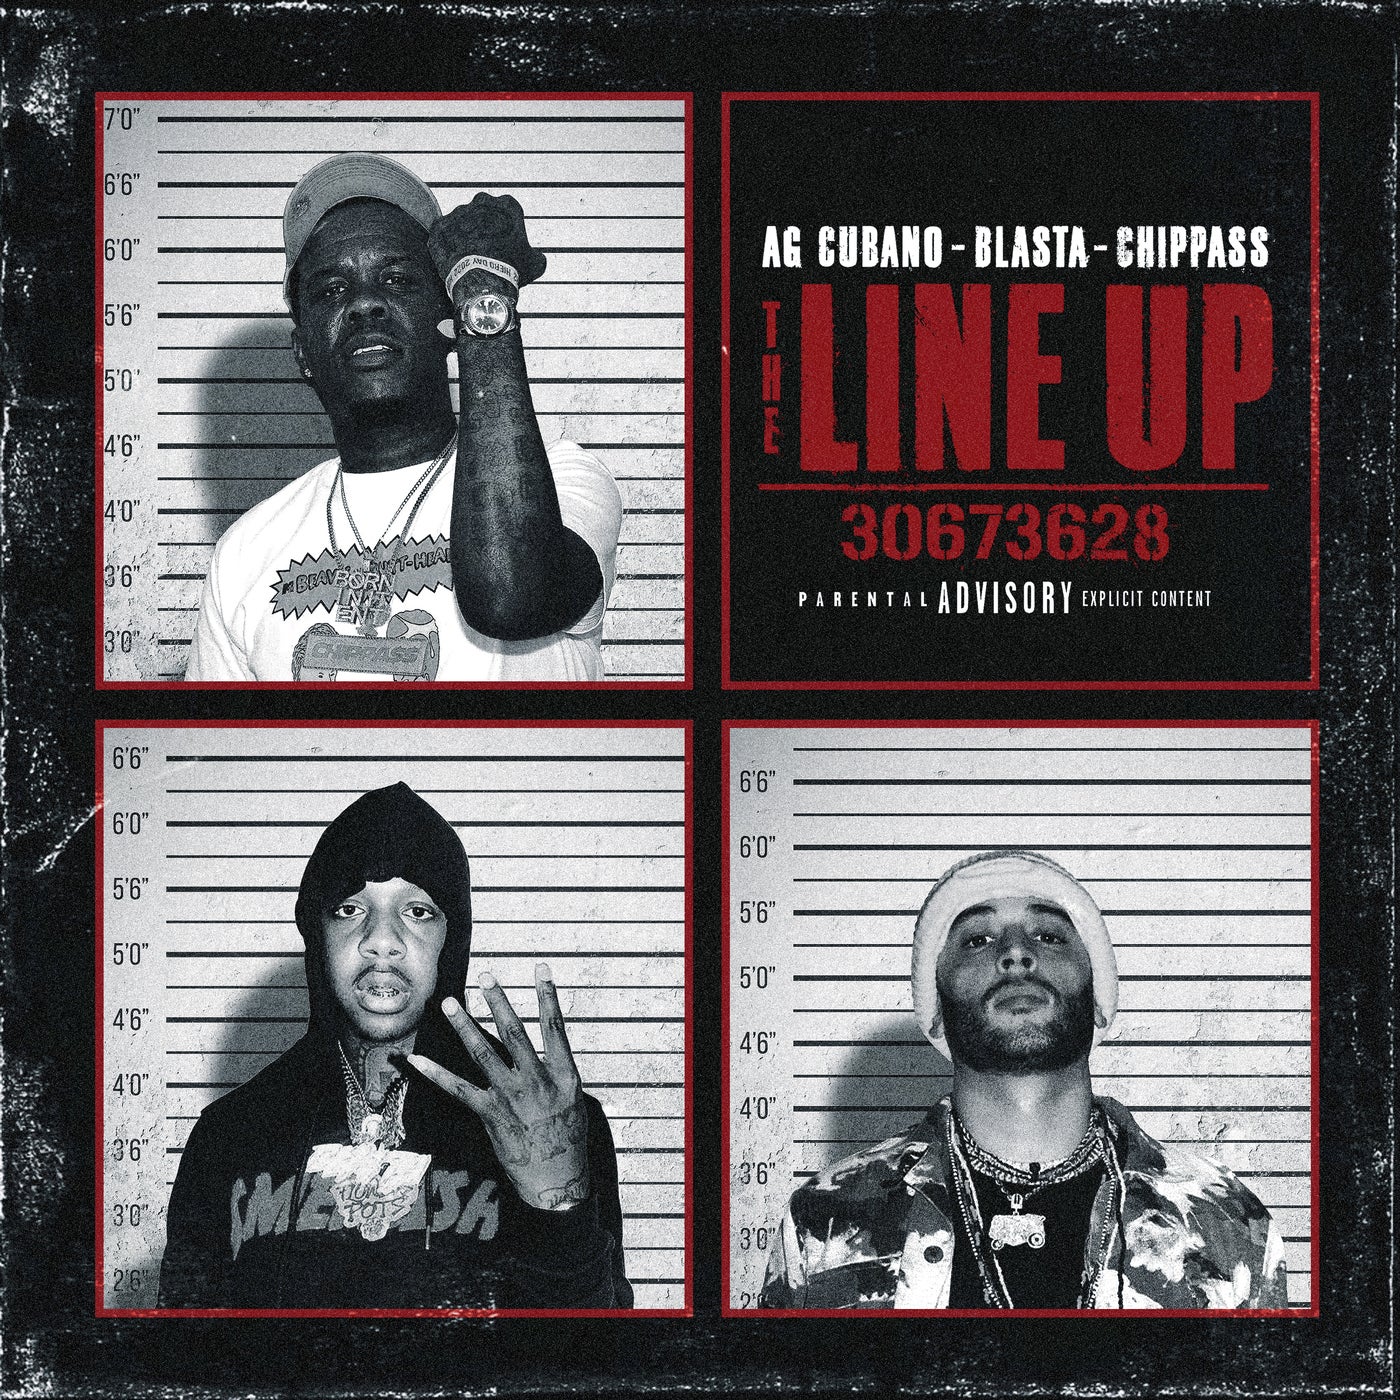 The Line Up by Chippass, AG Cubano and Bla$ta on Beatsource